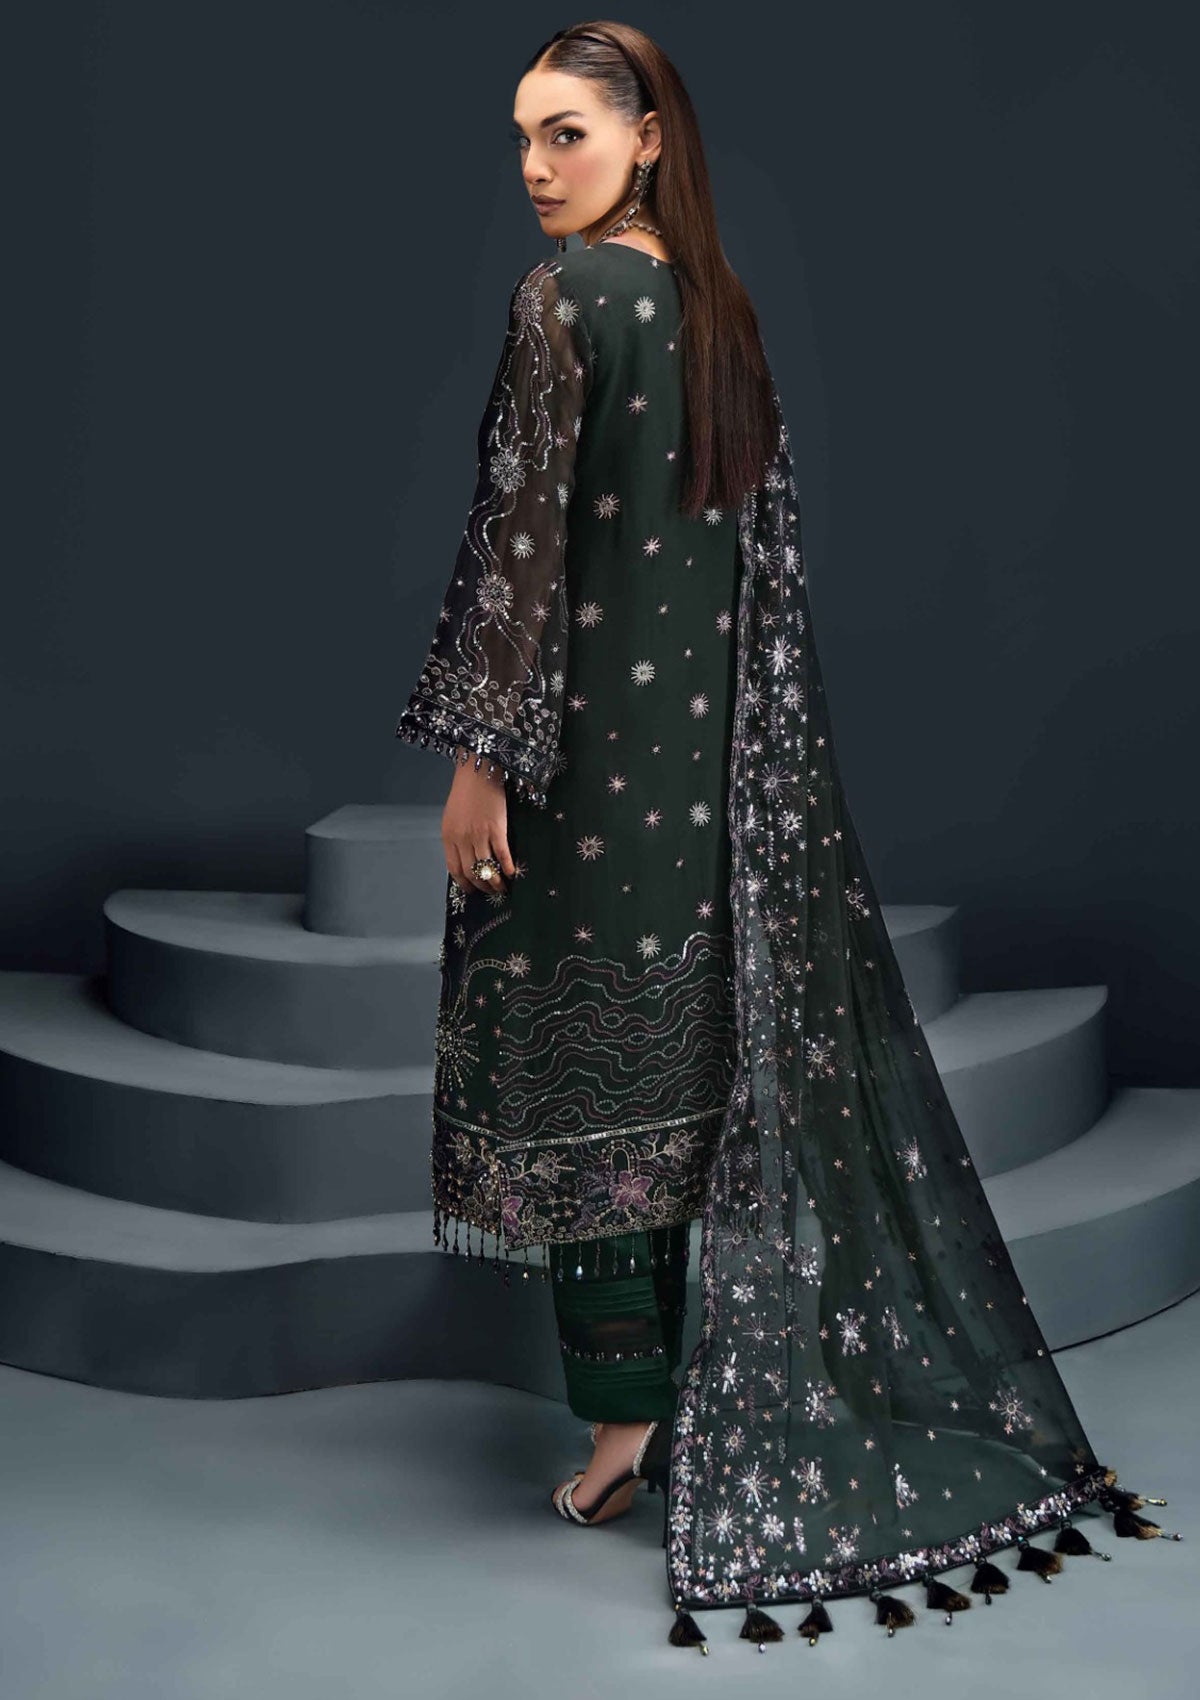 Formal Collection - Alizeh - Reena - Handcrafted - AH#07 - Cyra